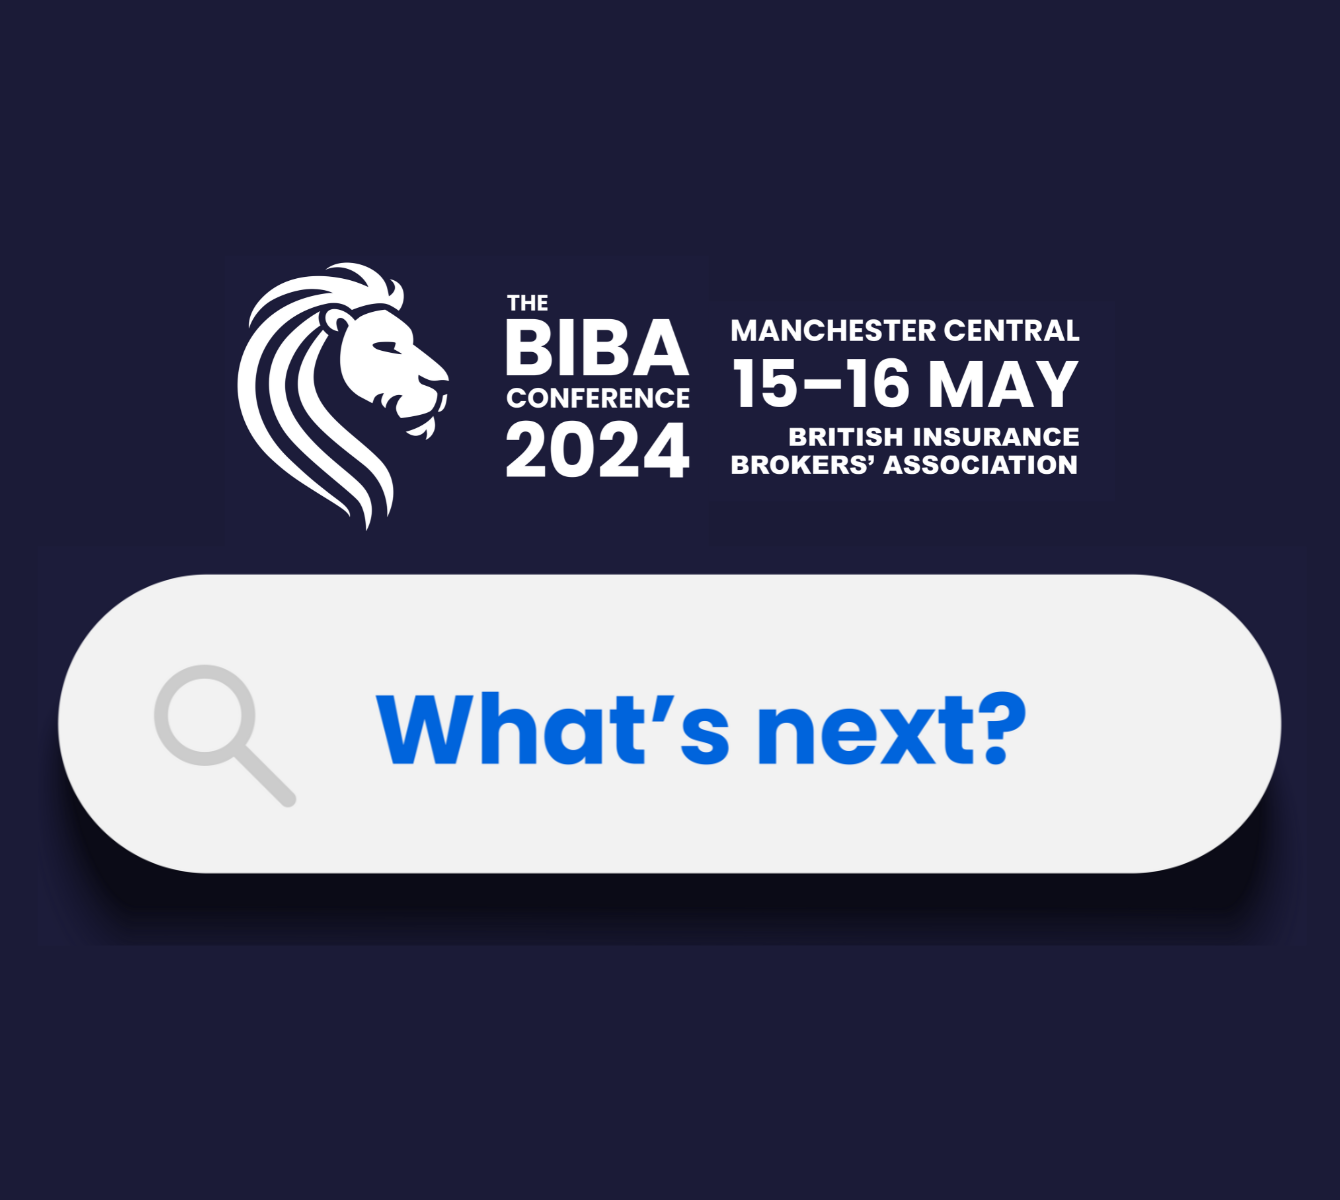 ‘What’s next?’ announced as the theme of The BIBA Conference 2024